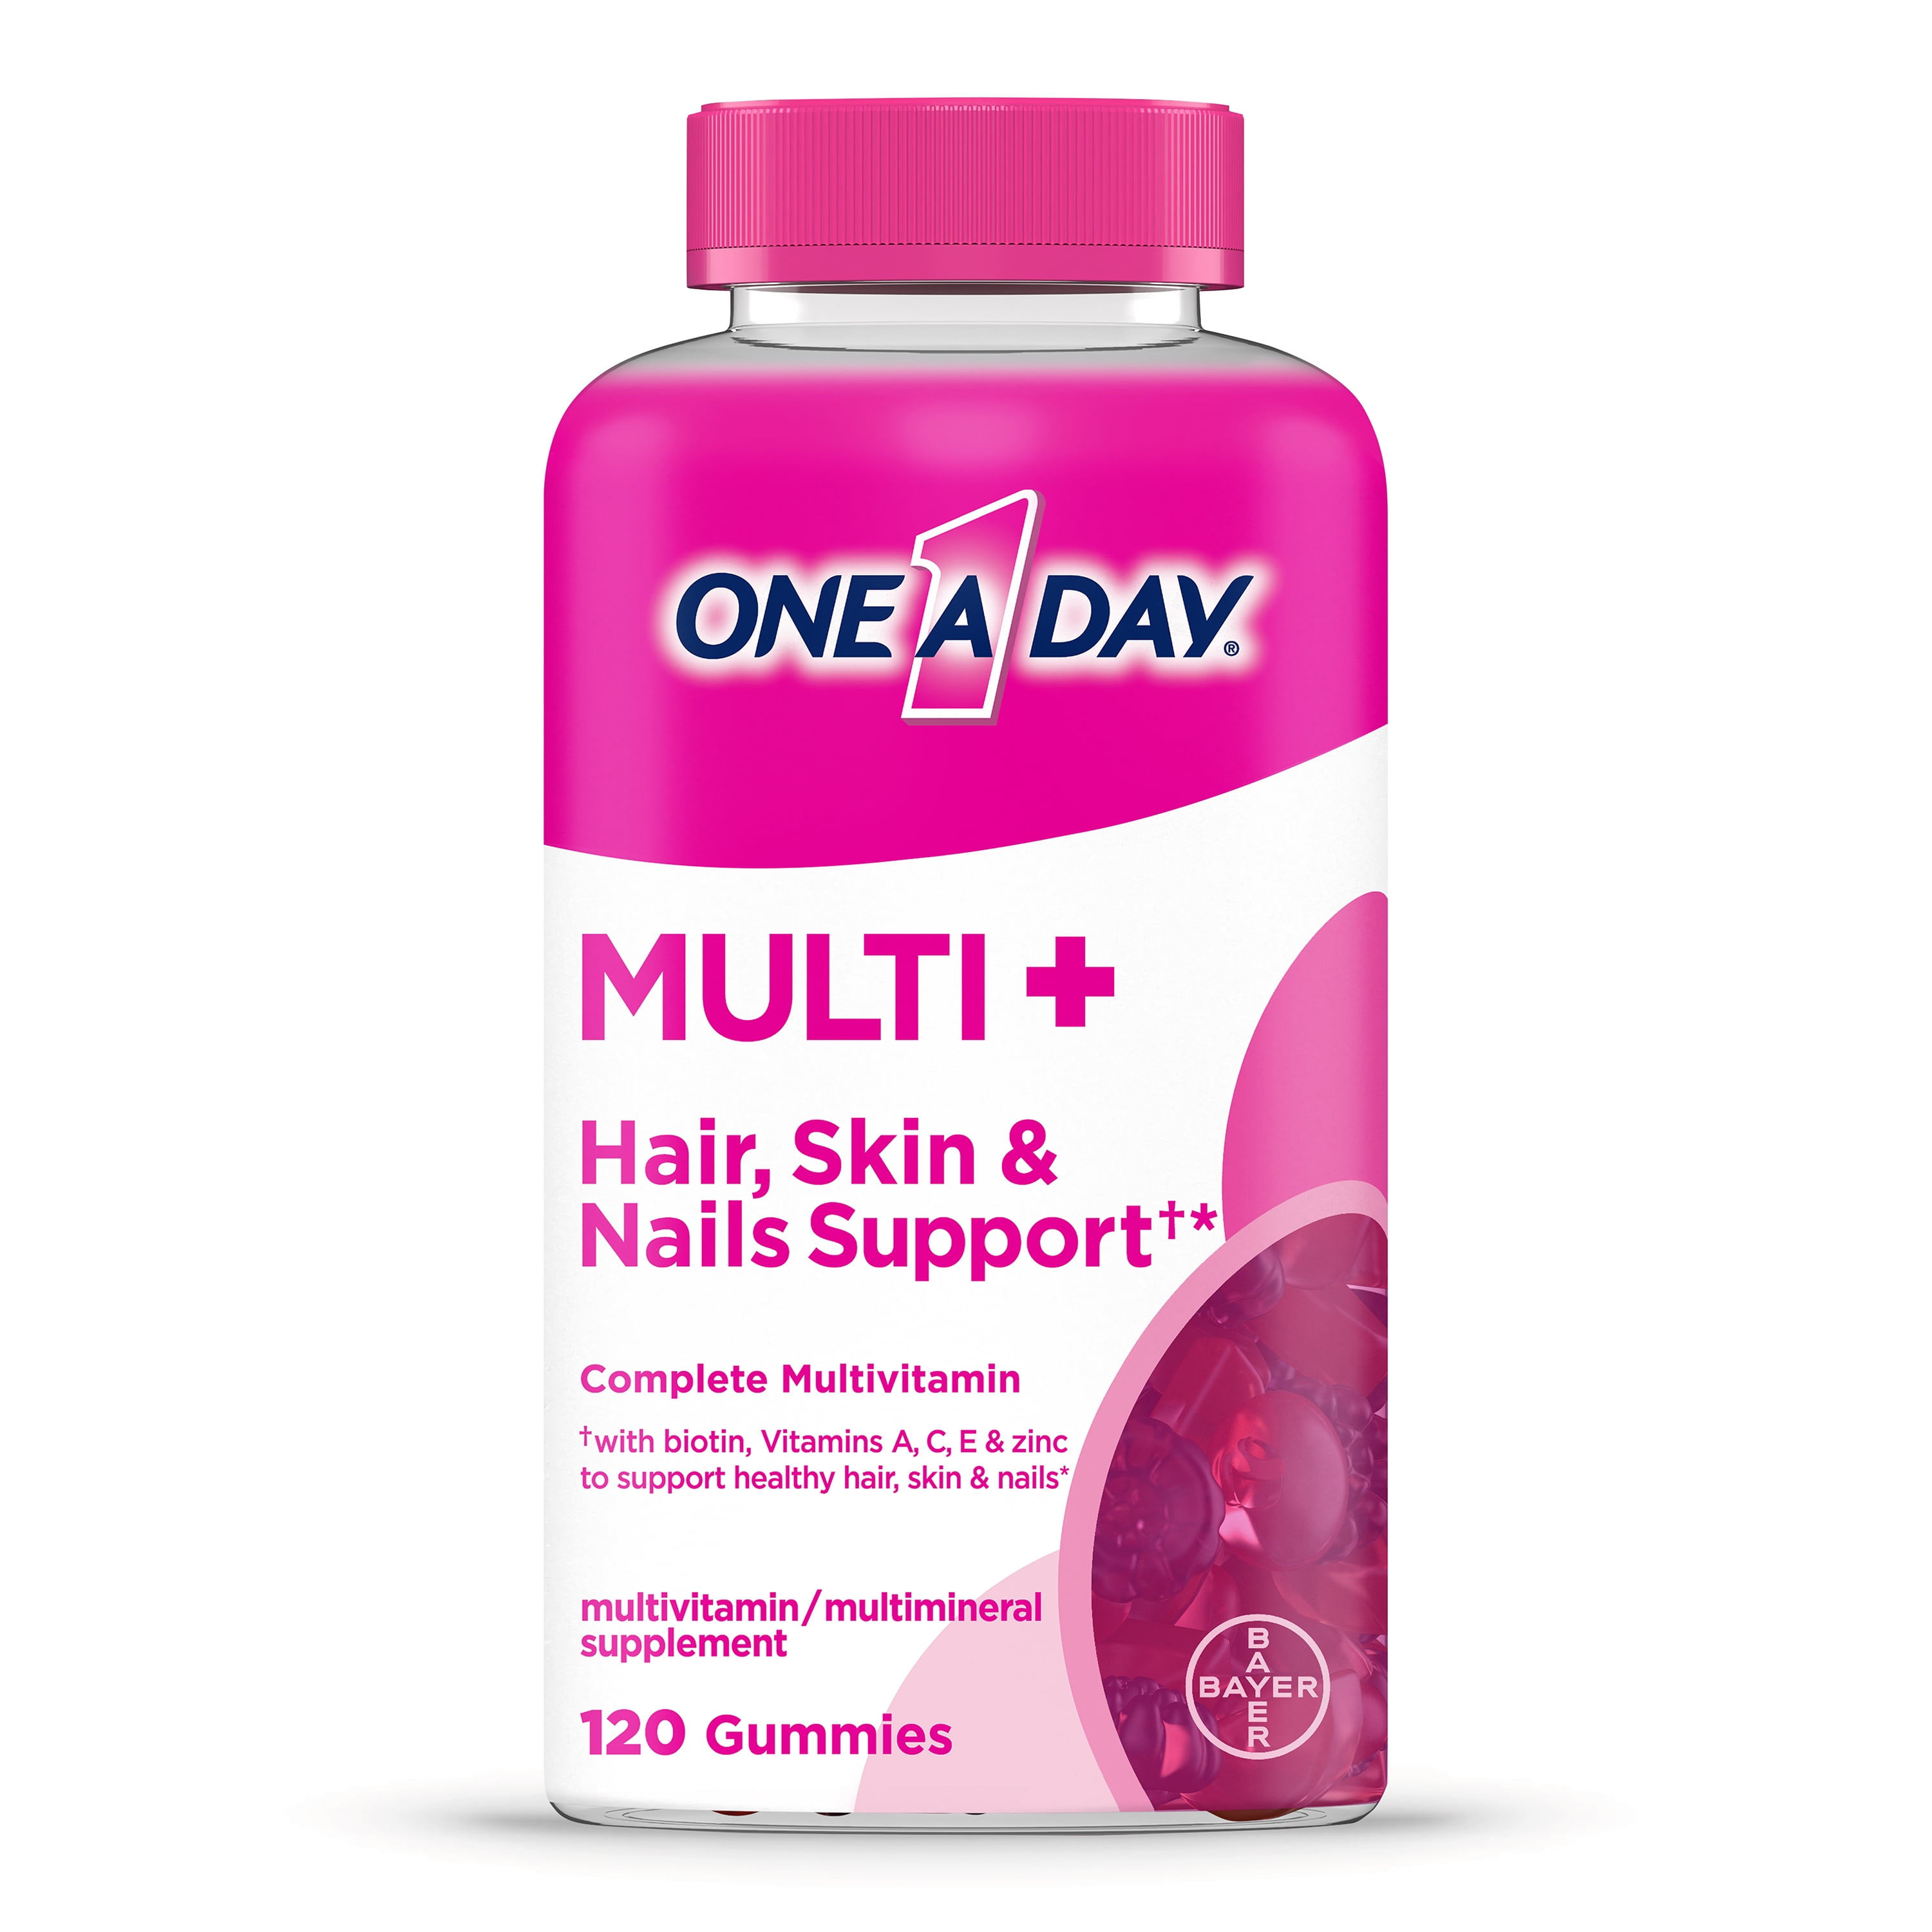 One A Day MULTI+ Hair, Skin & Nails Support Gummy Multivitamin, 120 Count -  